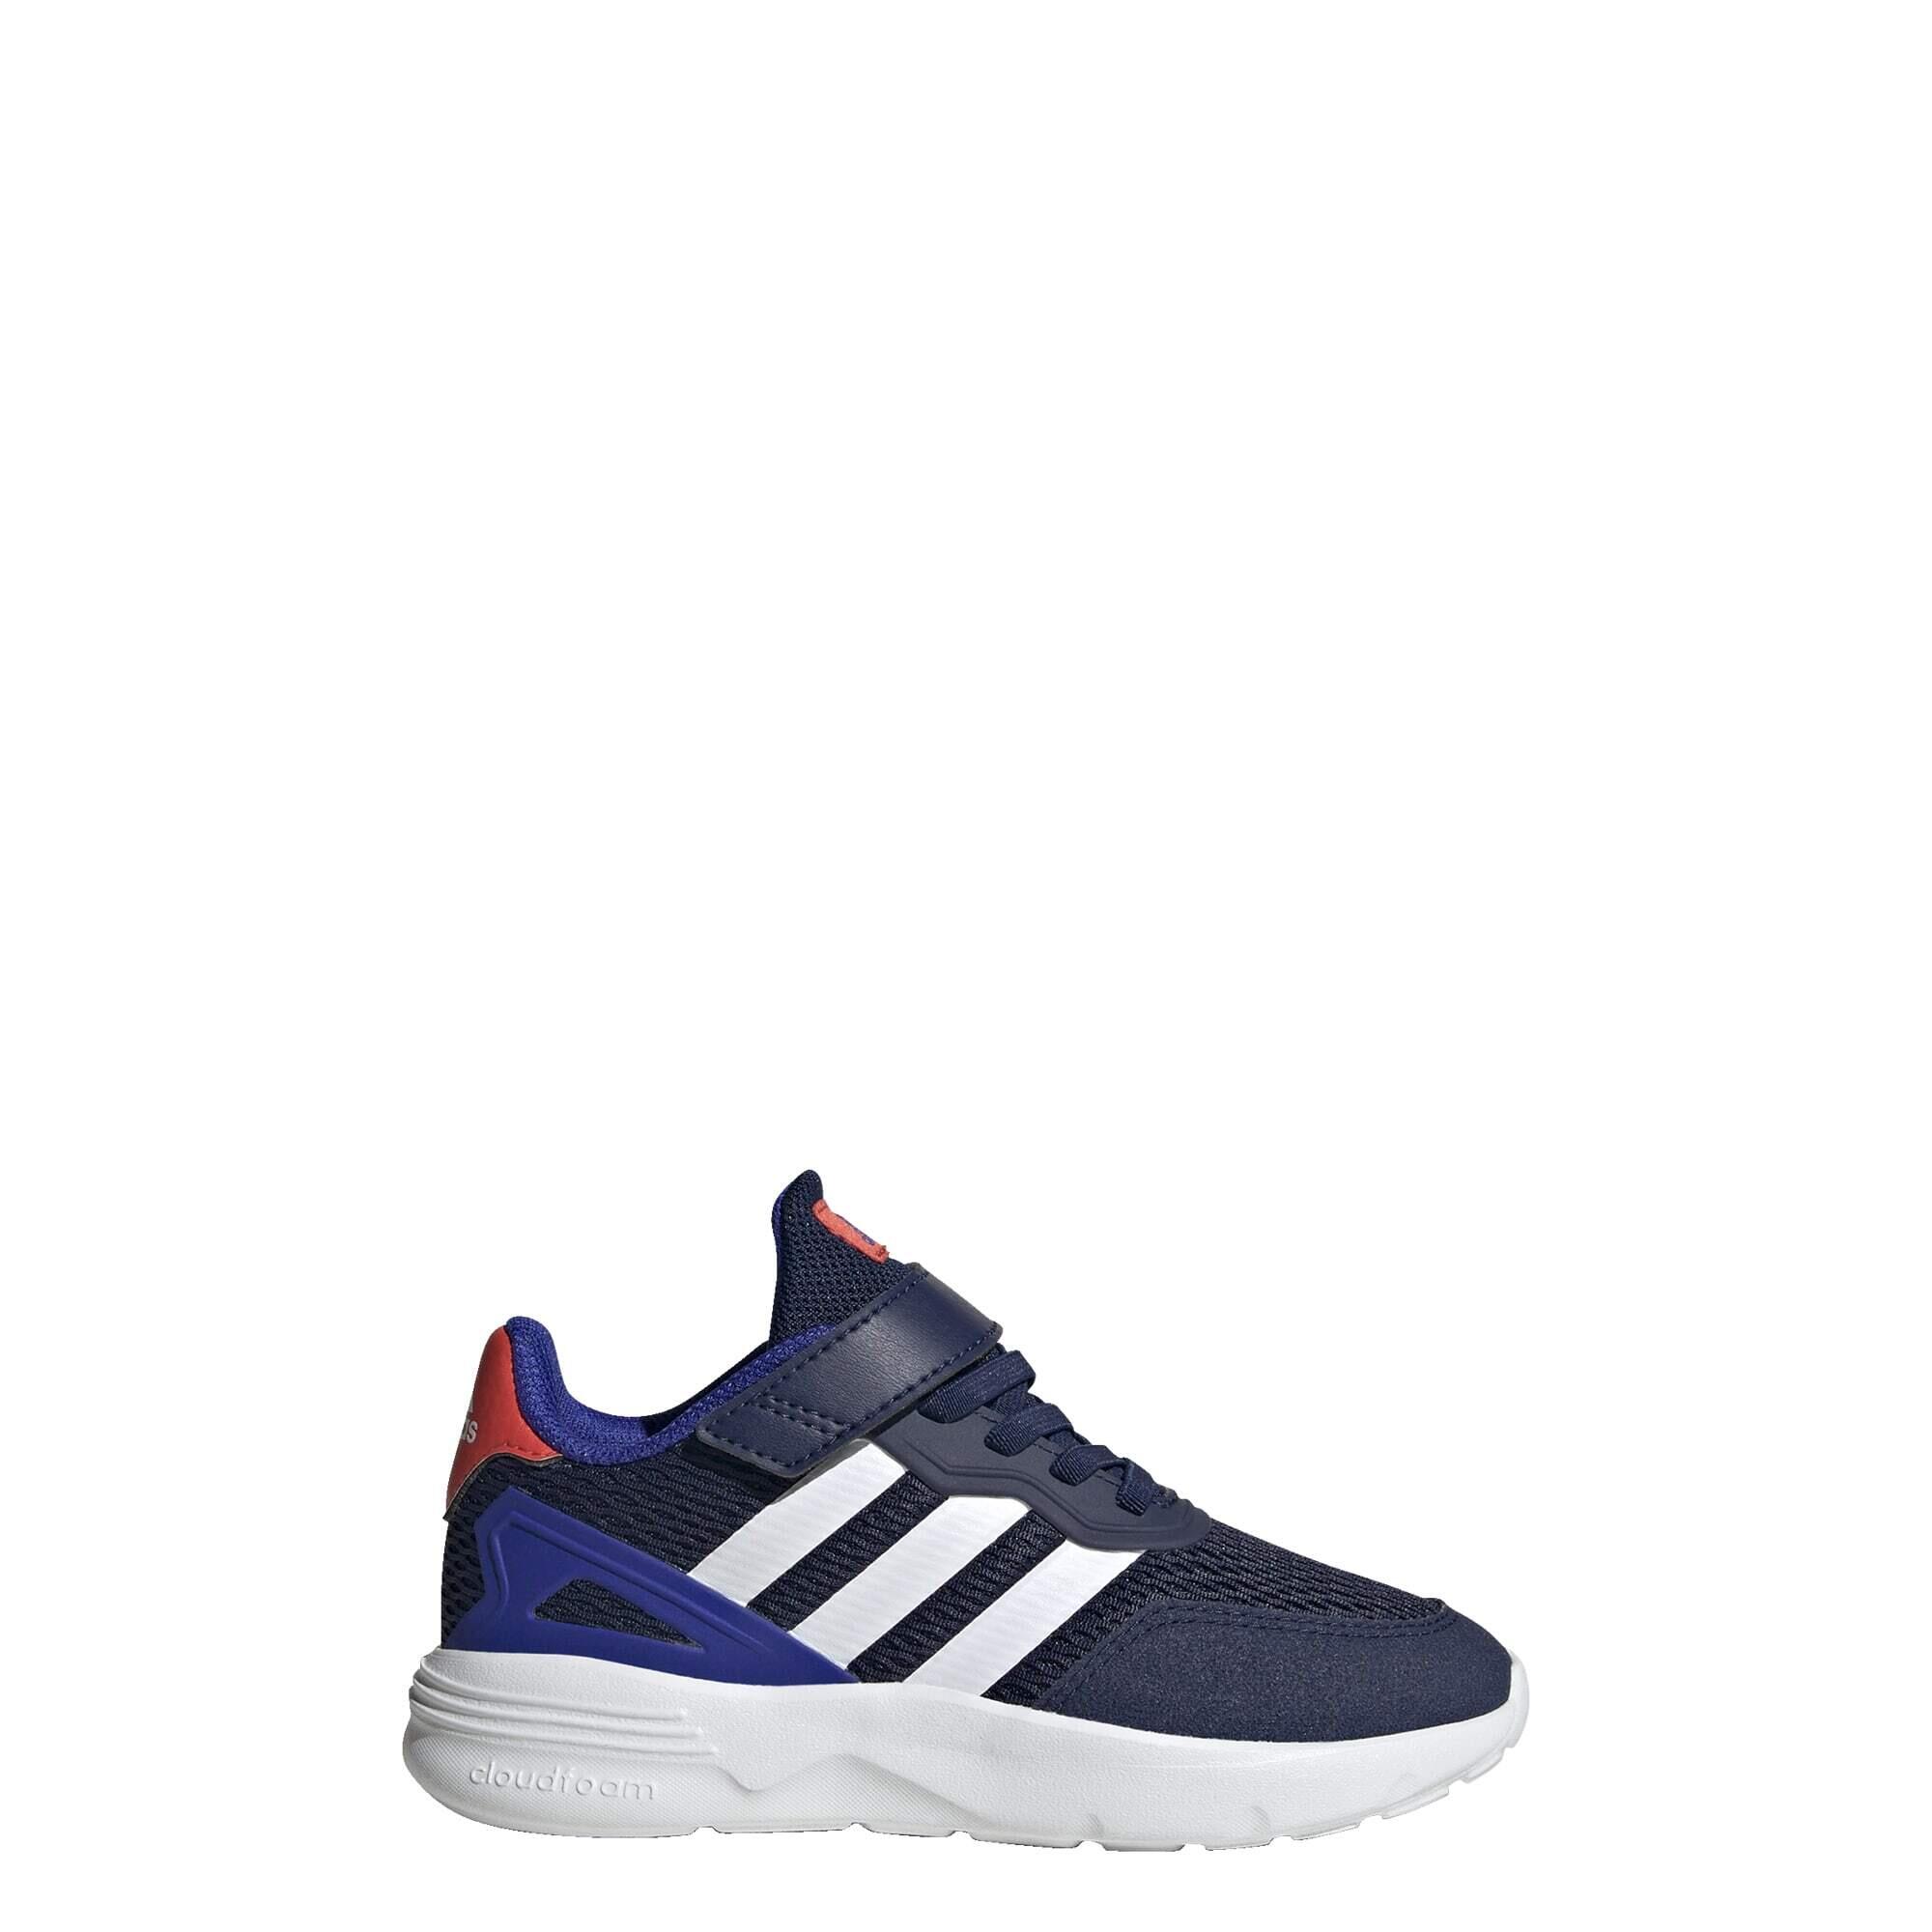 ADIDAS Nebzed Elastic Lace Top Strap Shoes